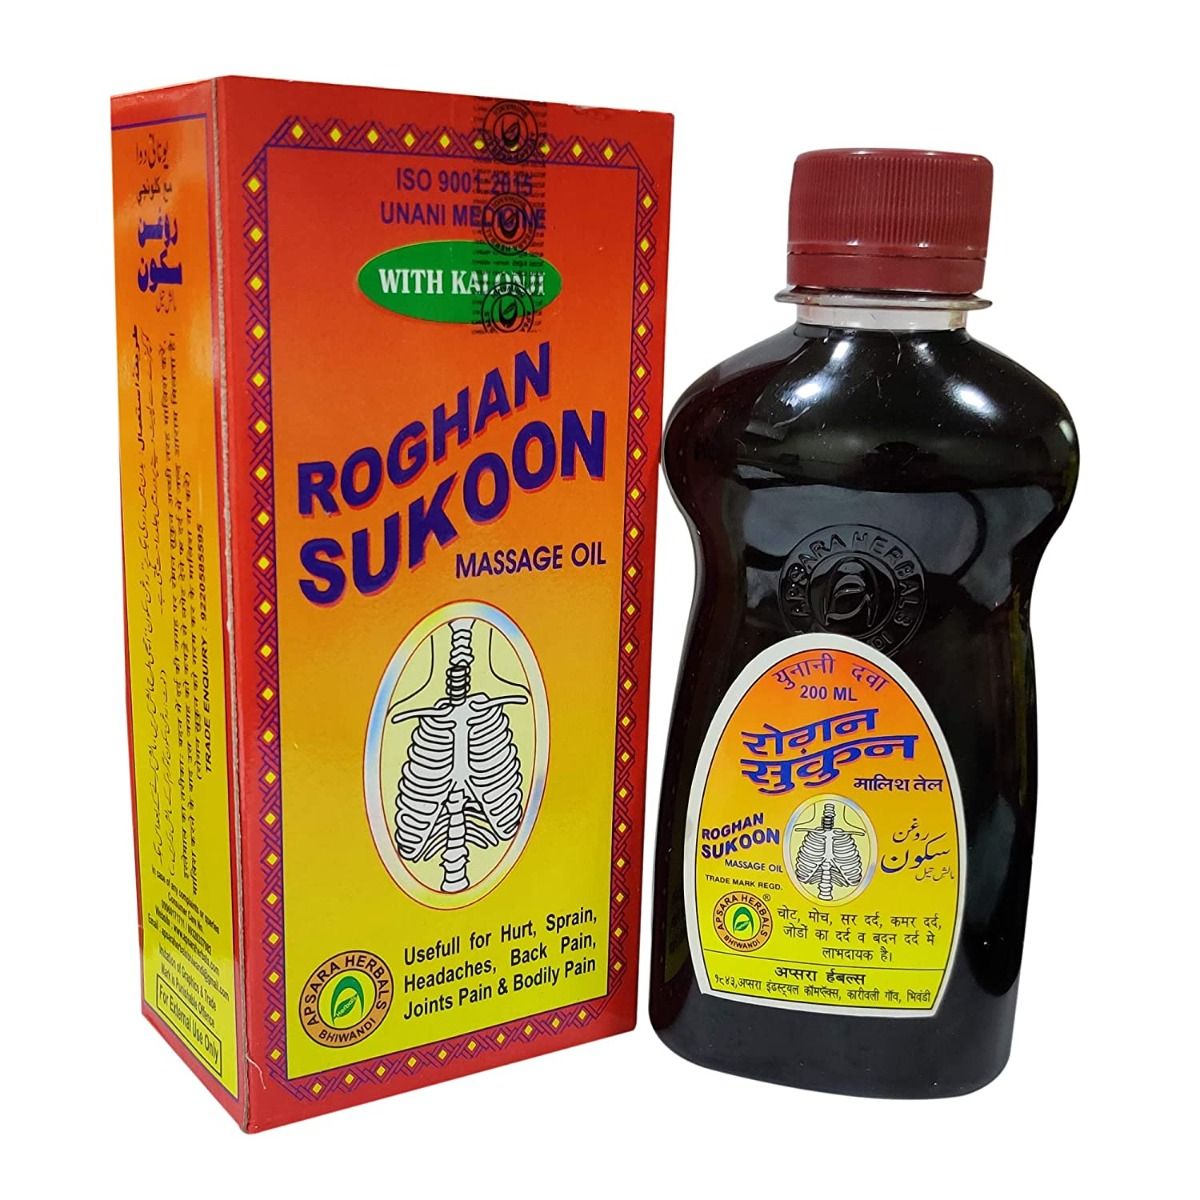 Sukoon Massage Oil, 100 ml Price, Uses, Side Effects, Composition ...